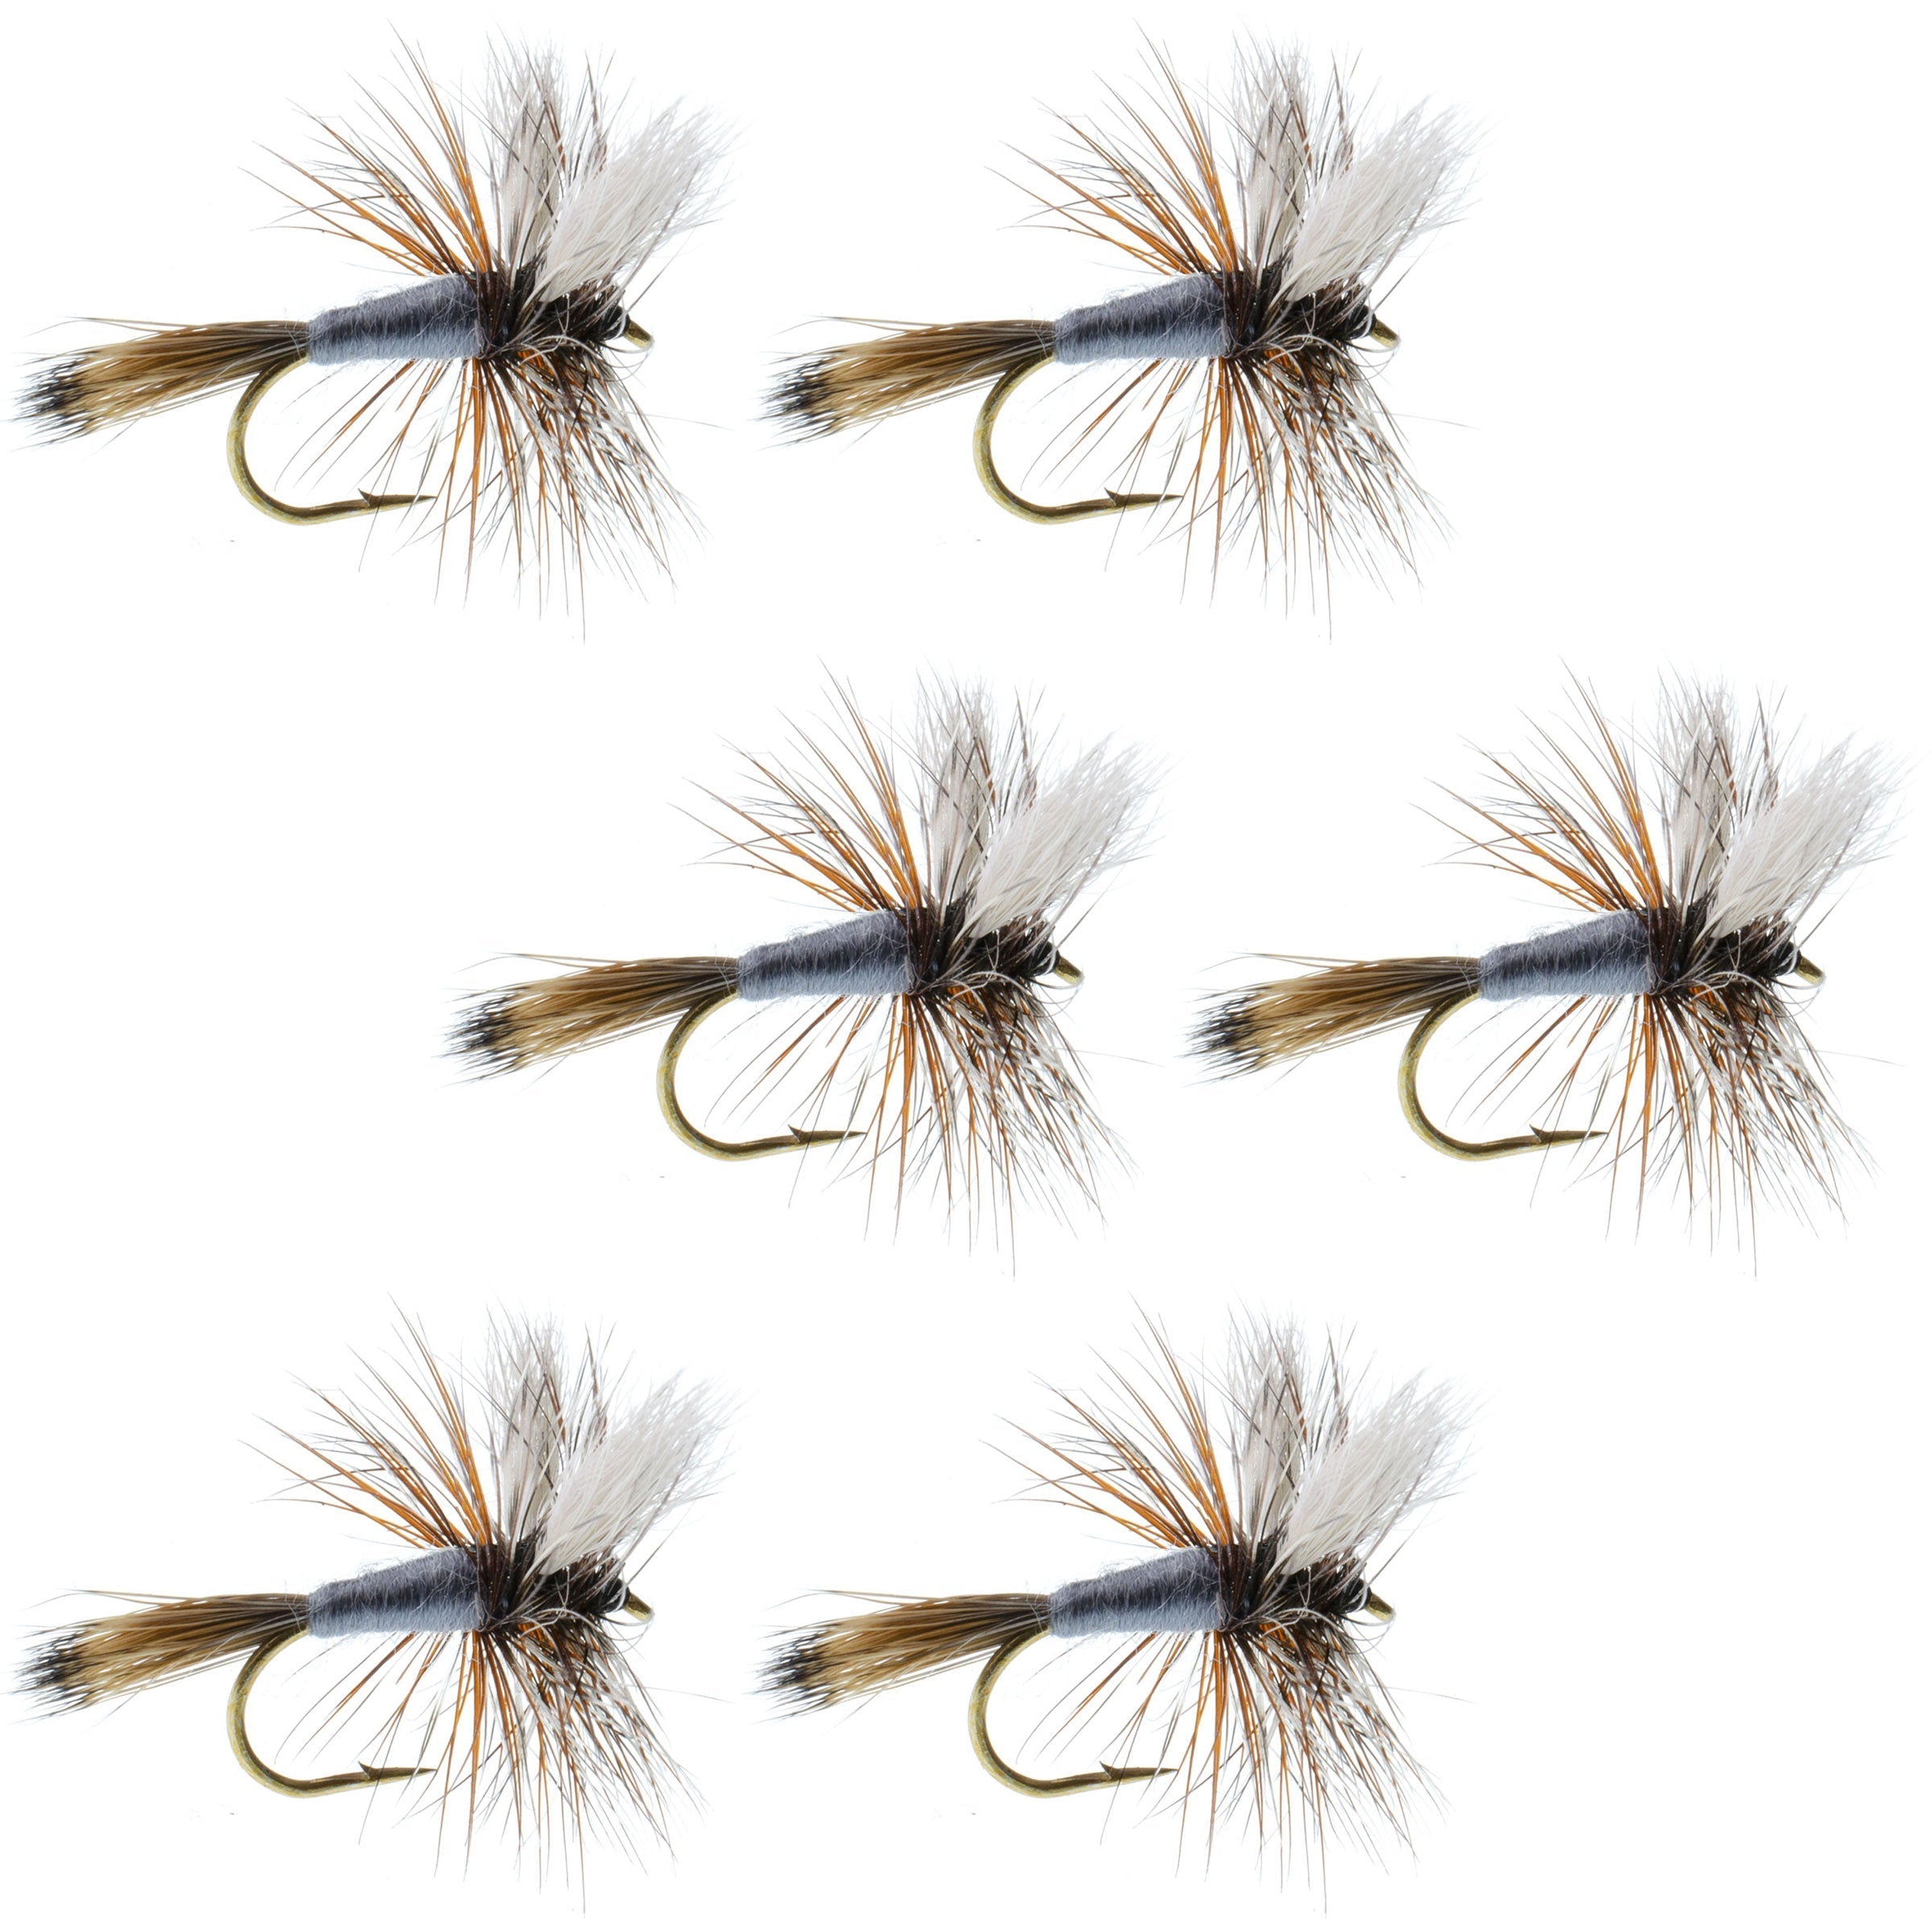 Trout Fly Assortment - Essential Western Dry and Nymph Fly Fishing Fli